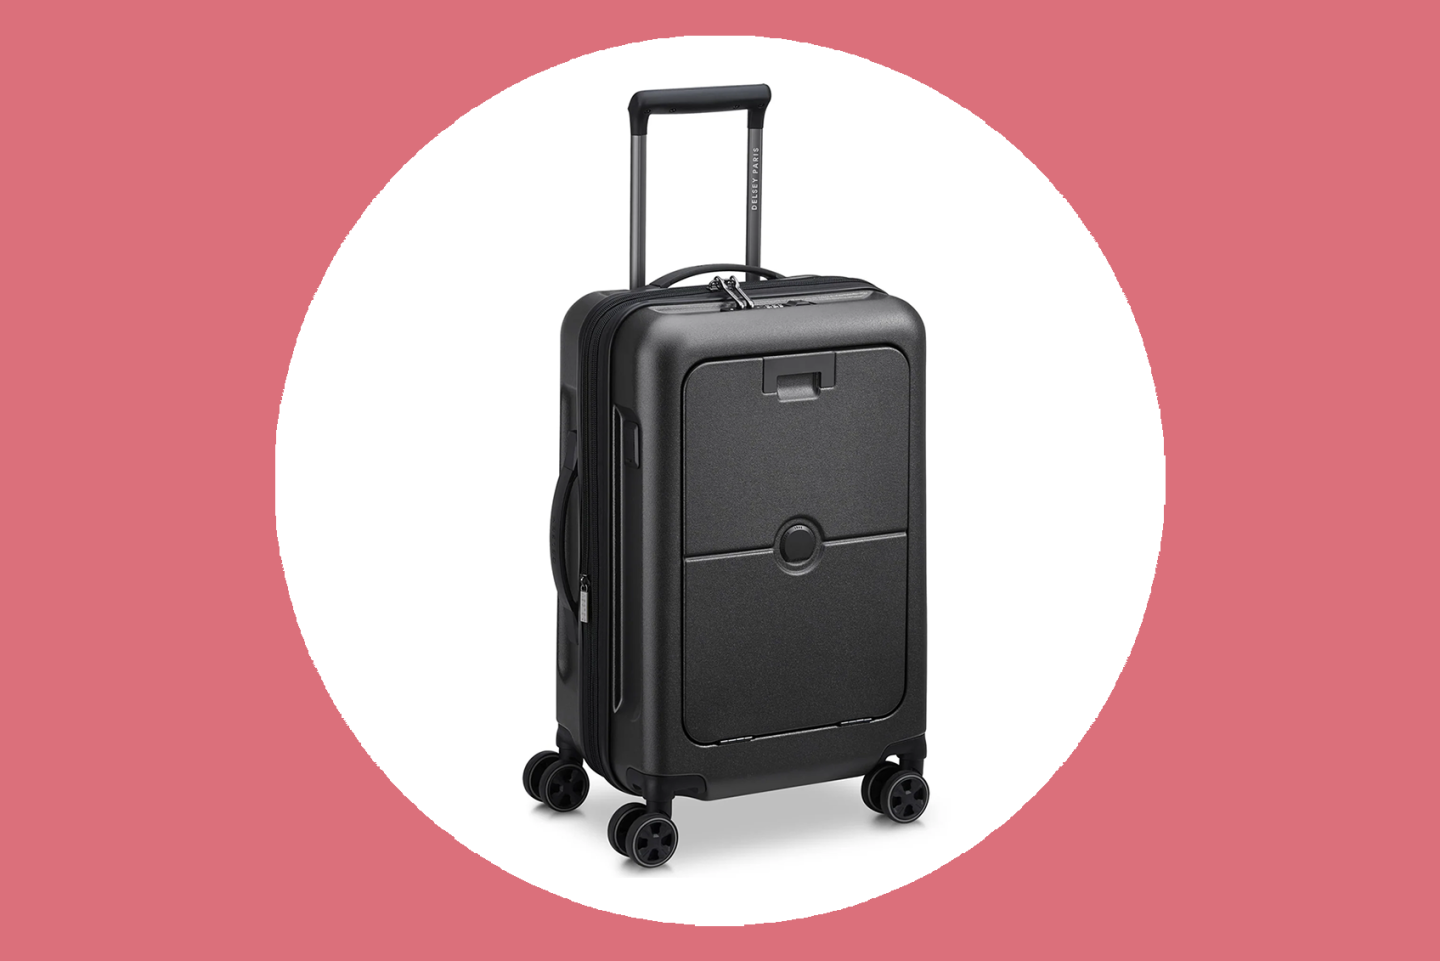 <a>The new Delsey Turenne carry-on comes with business-trip ready features like a laptop pocket and an AirTag holder.</a>